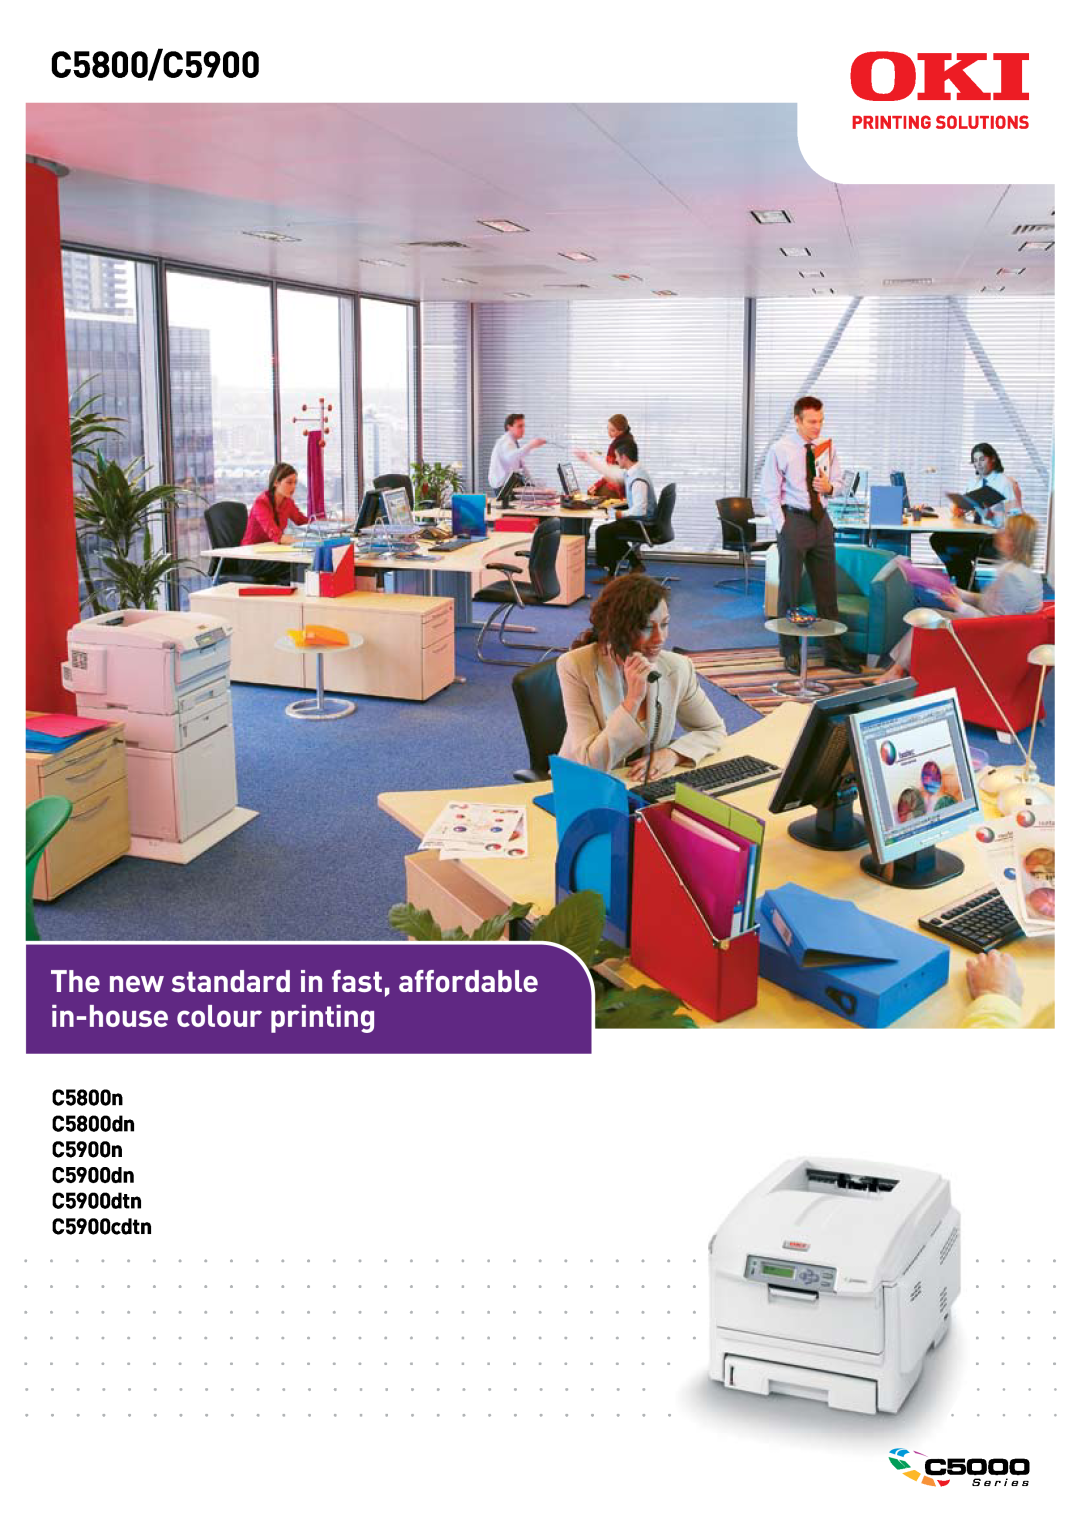 Oki C5900cdtn, 5800dn, C5800n, C5900n manual C5800/C5900, The new standard in fast, affordable in-house colour printing 